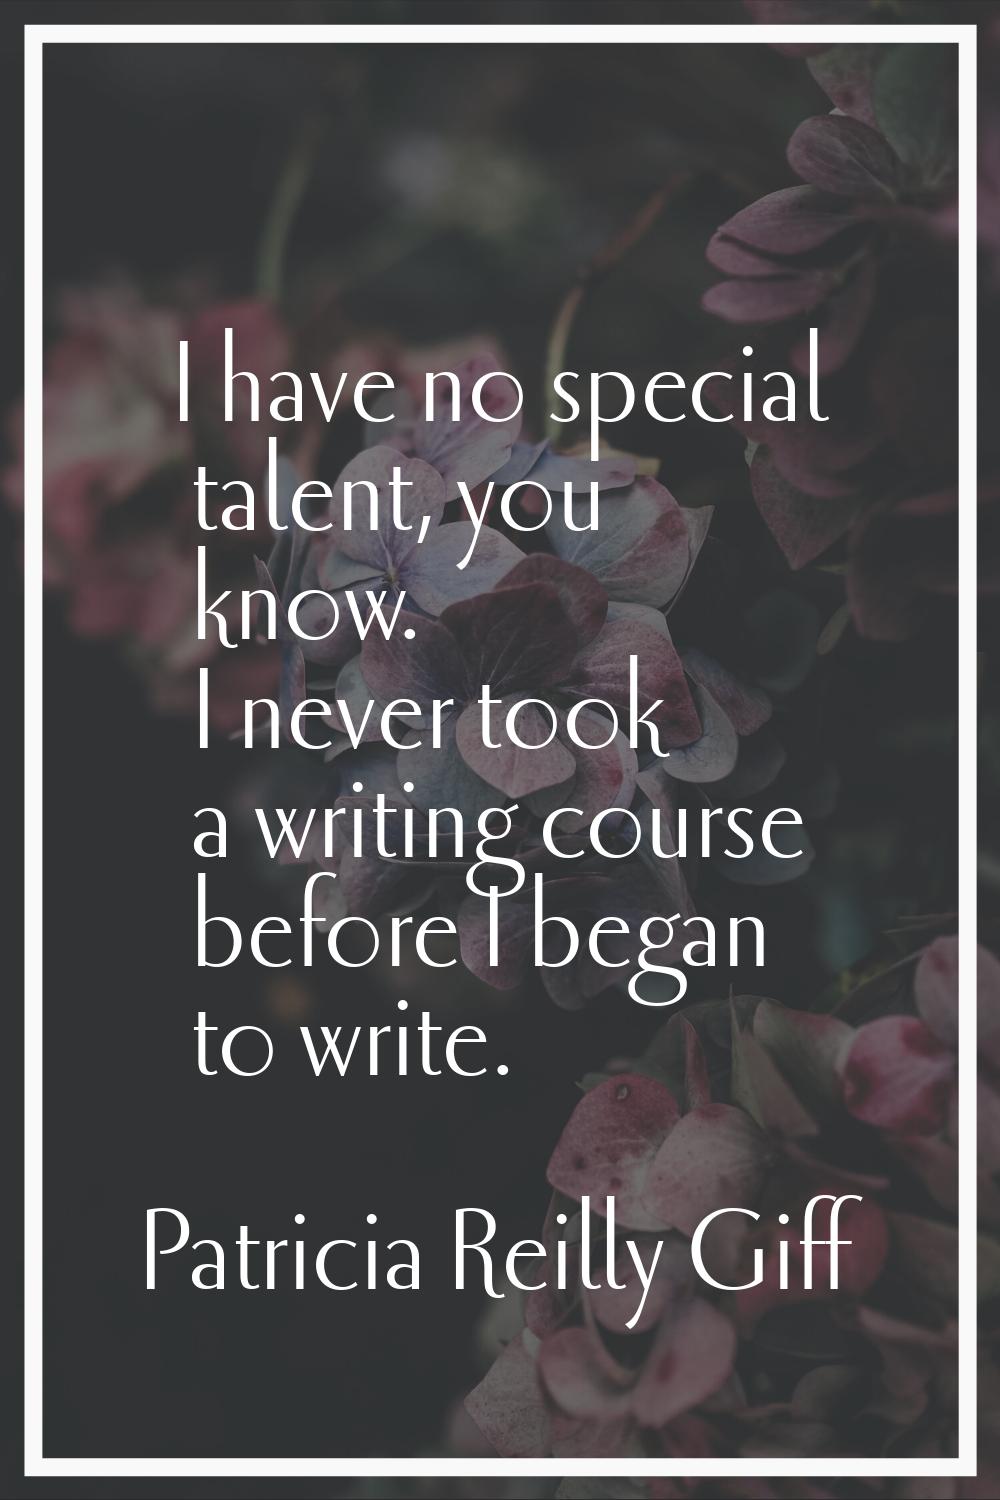 I have no special talent, you know. I never took a writing course before I began to write.